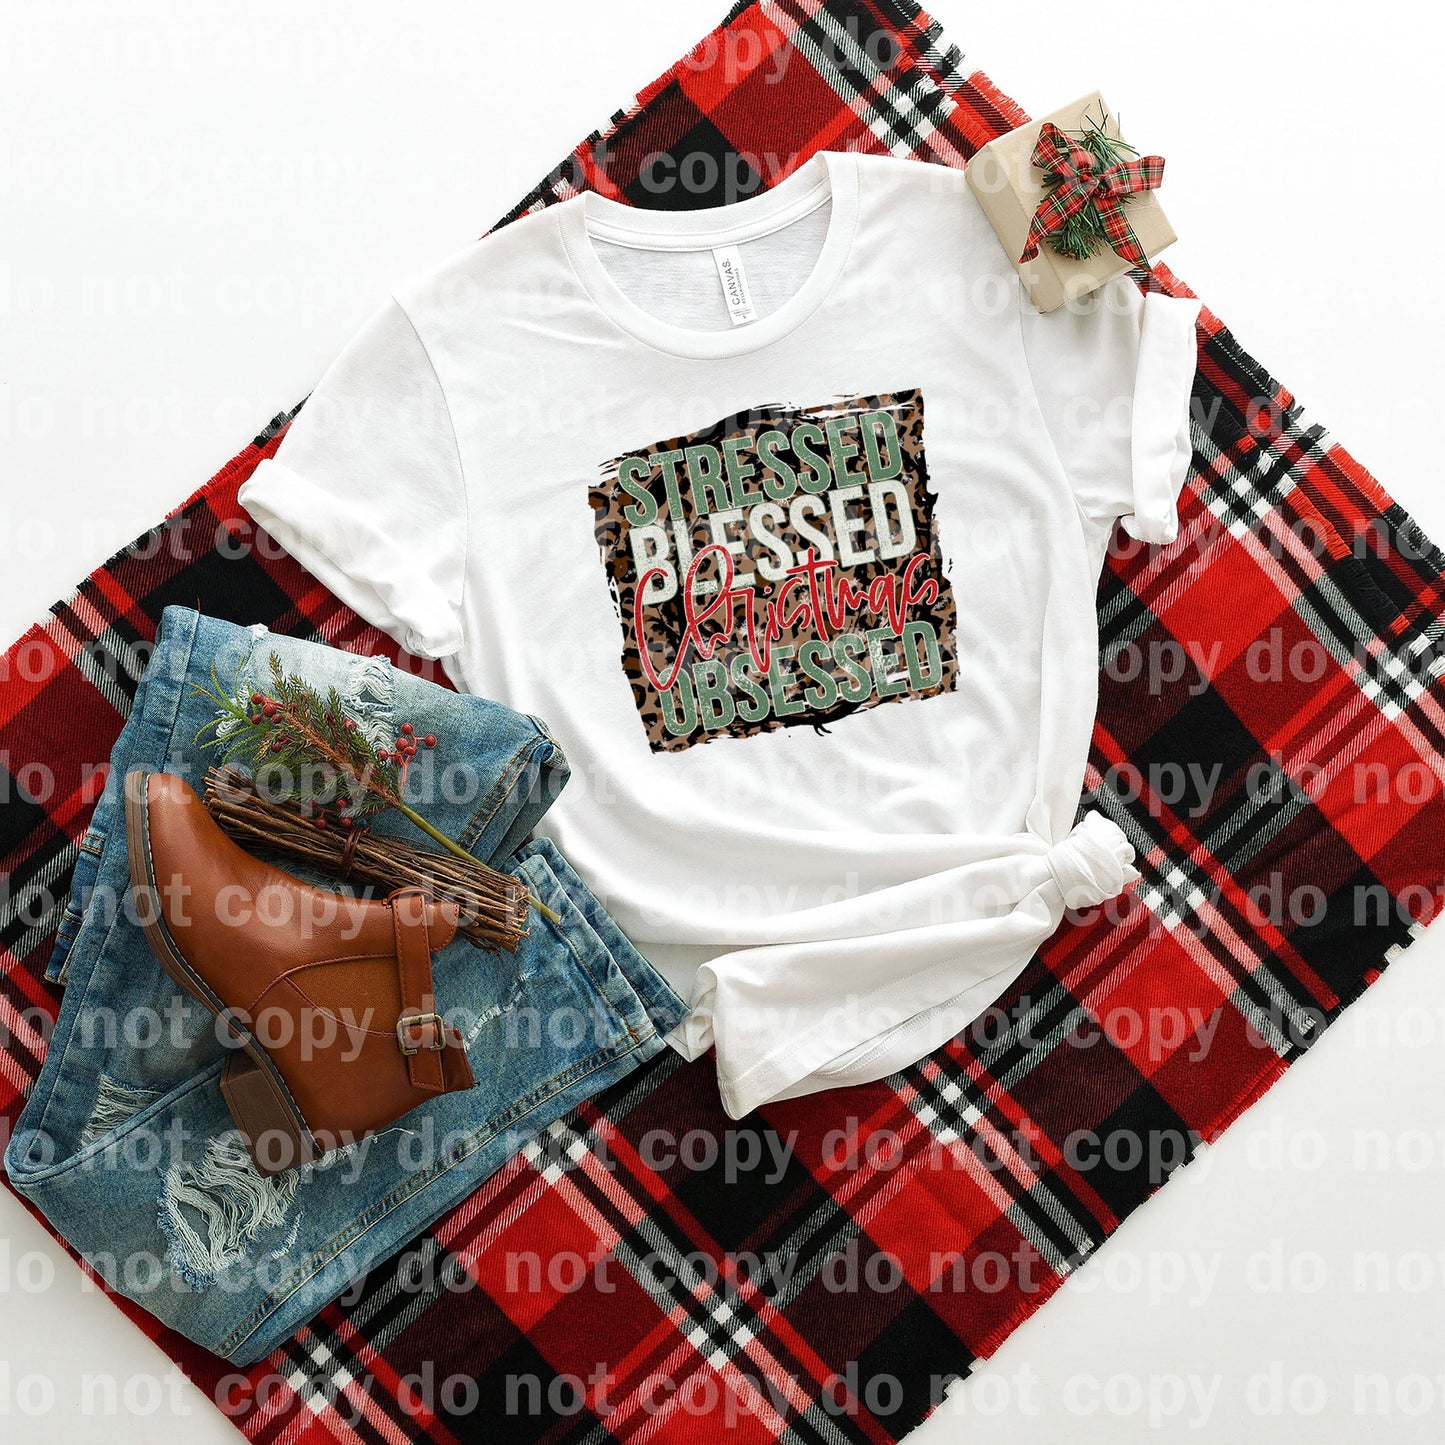 Stressed Blessed Christmas Obsessed Dream Print or Sublimation Print